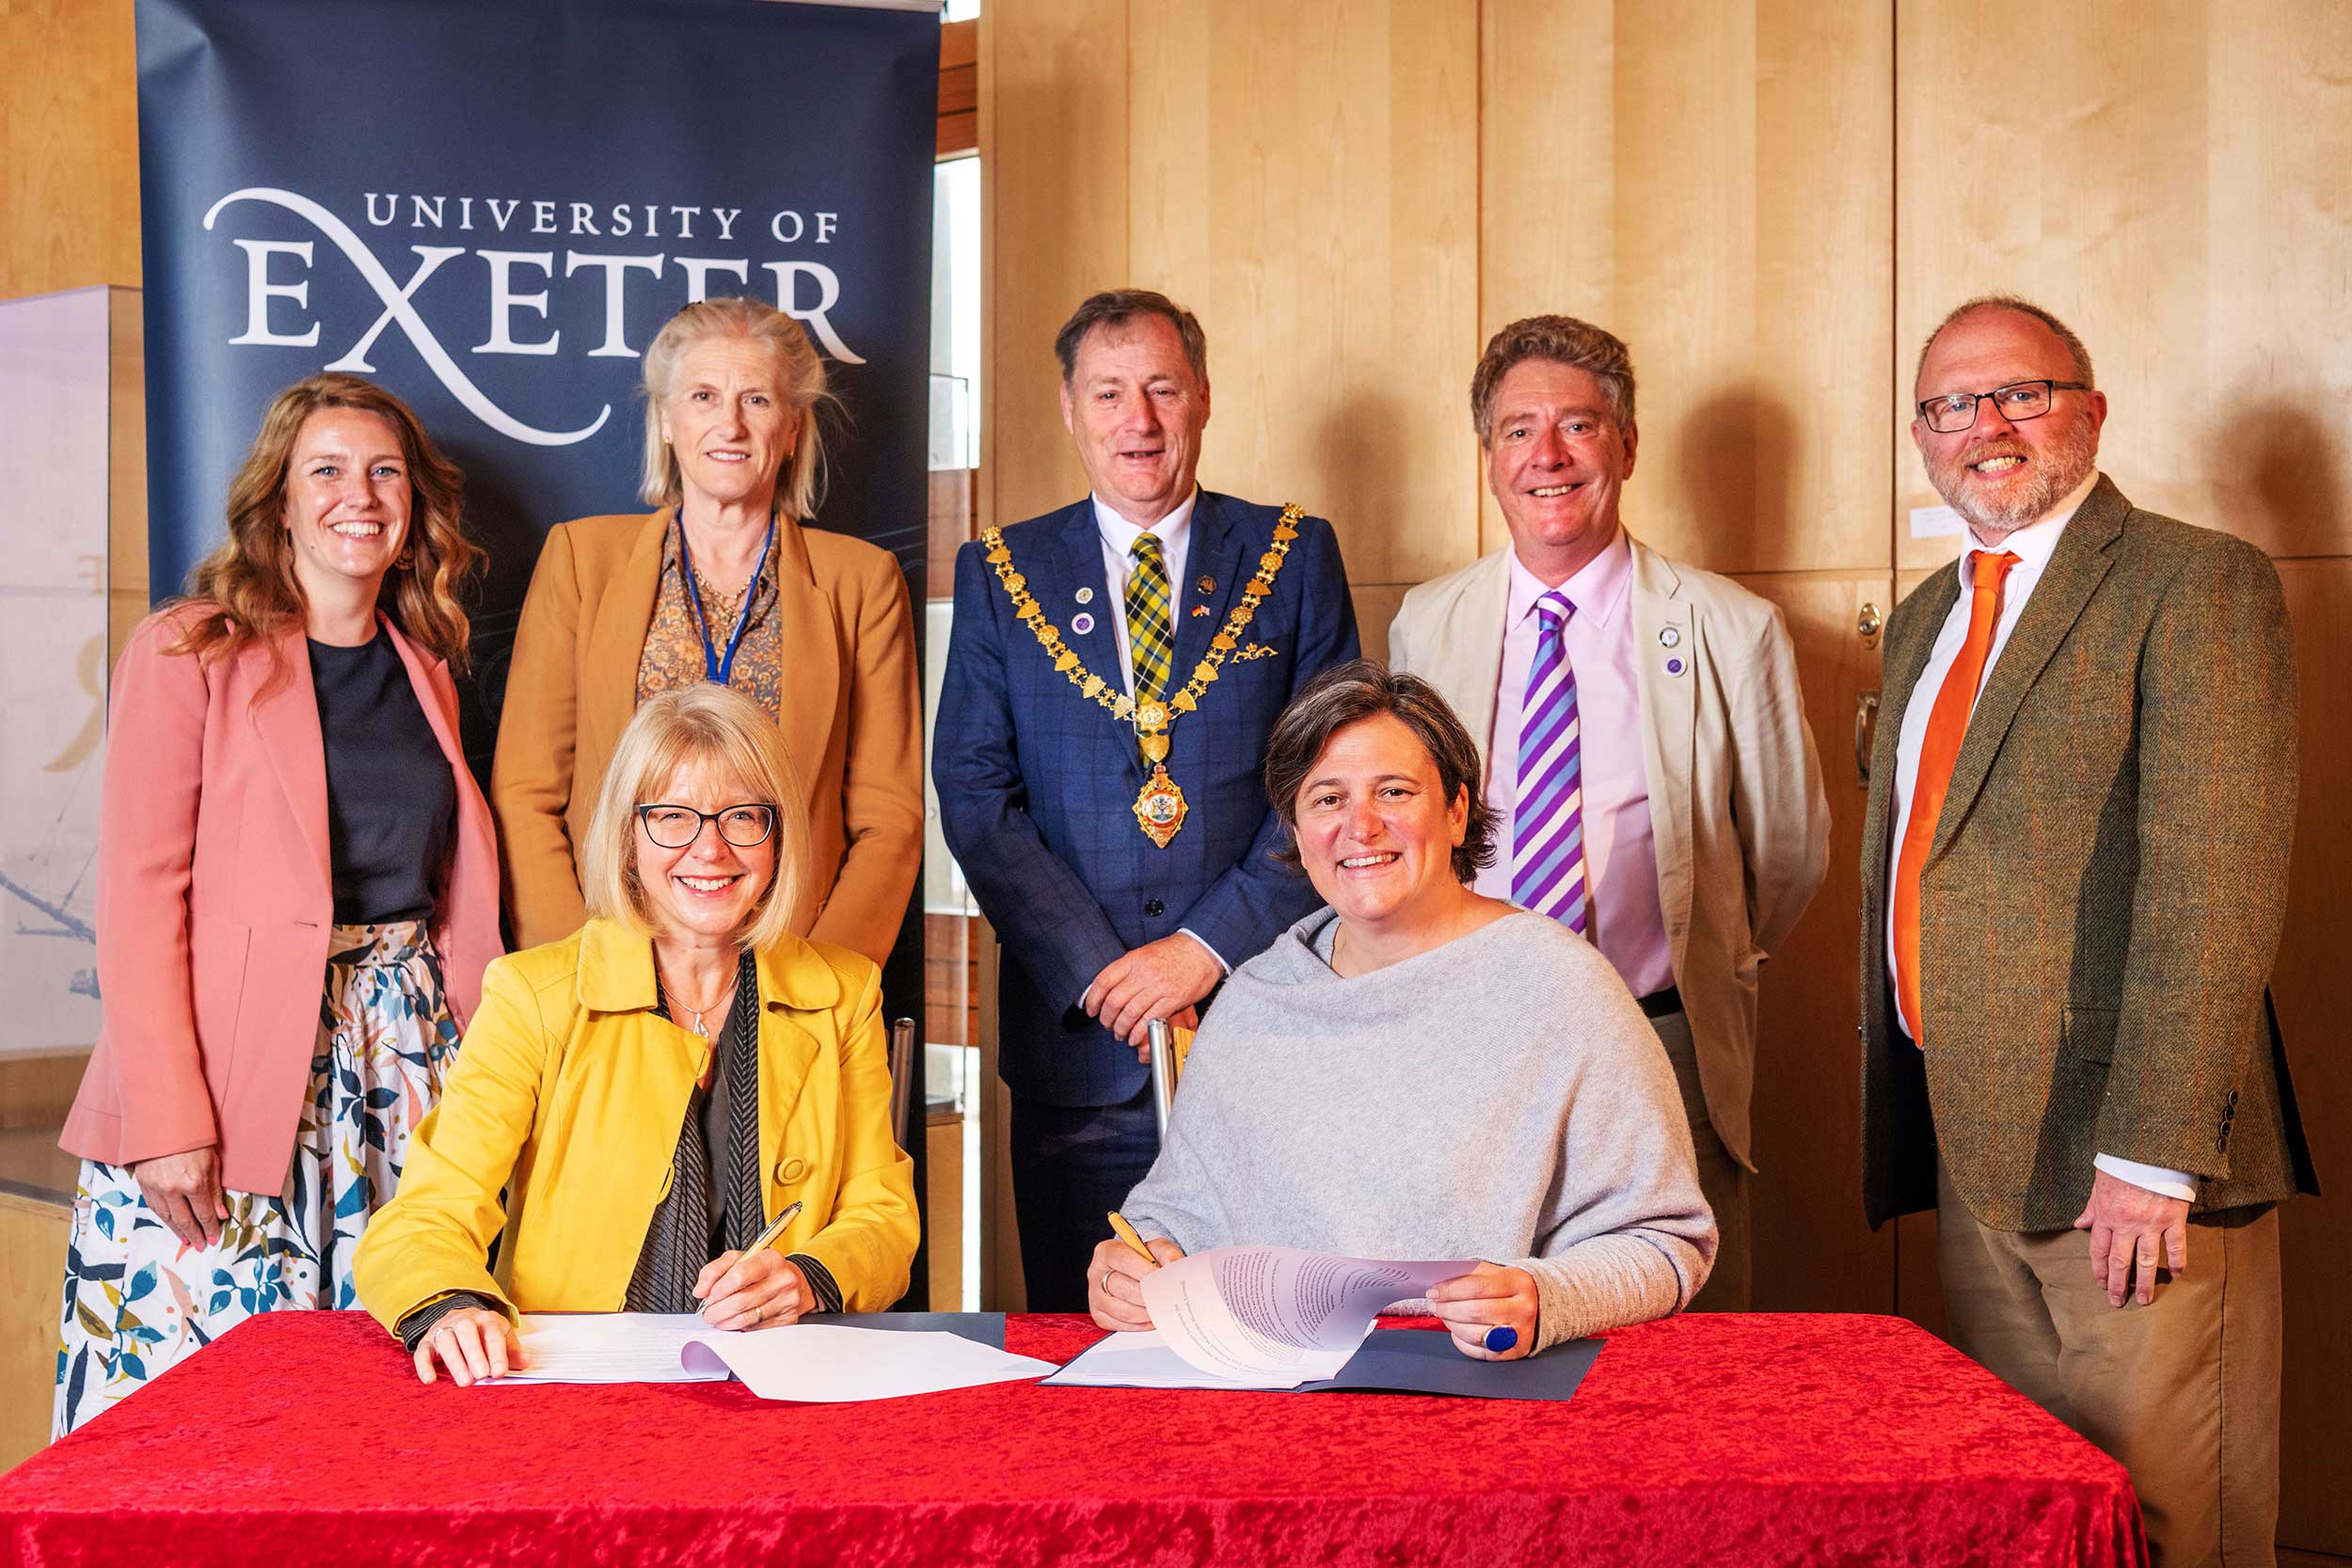 Seven people - four women and three men - pose for a photograph in front of a 'University of Exeter' banner. Two of the women are seated at a table with a red throw over it, signing two documents.